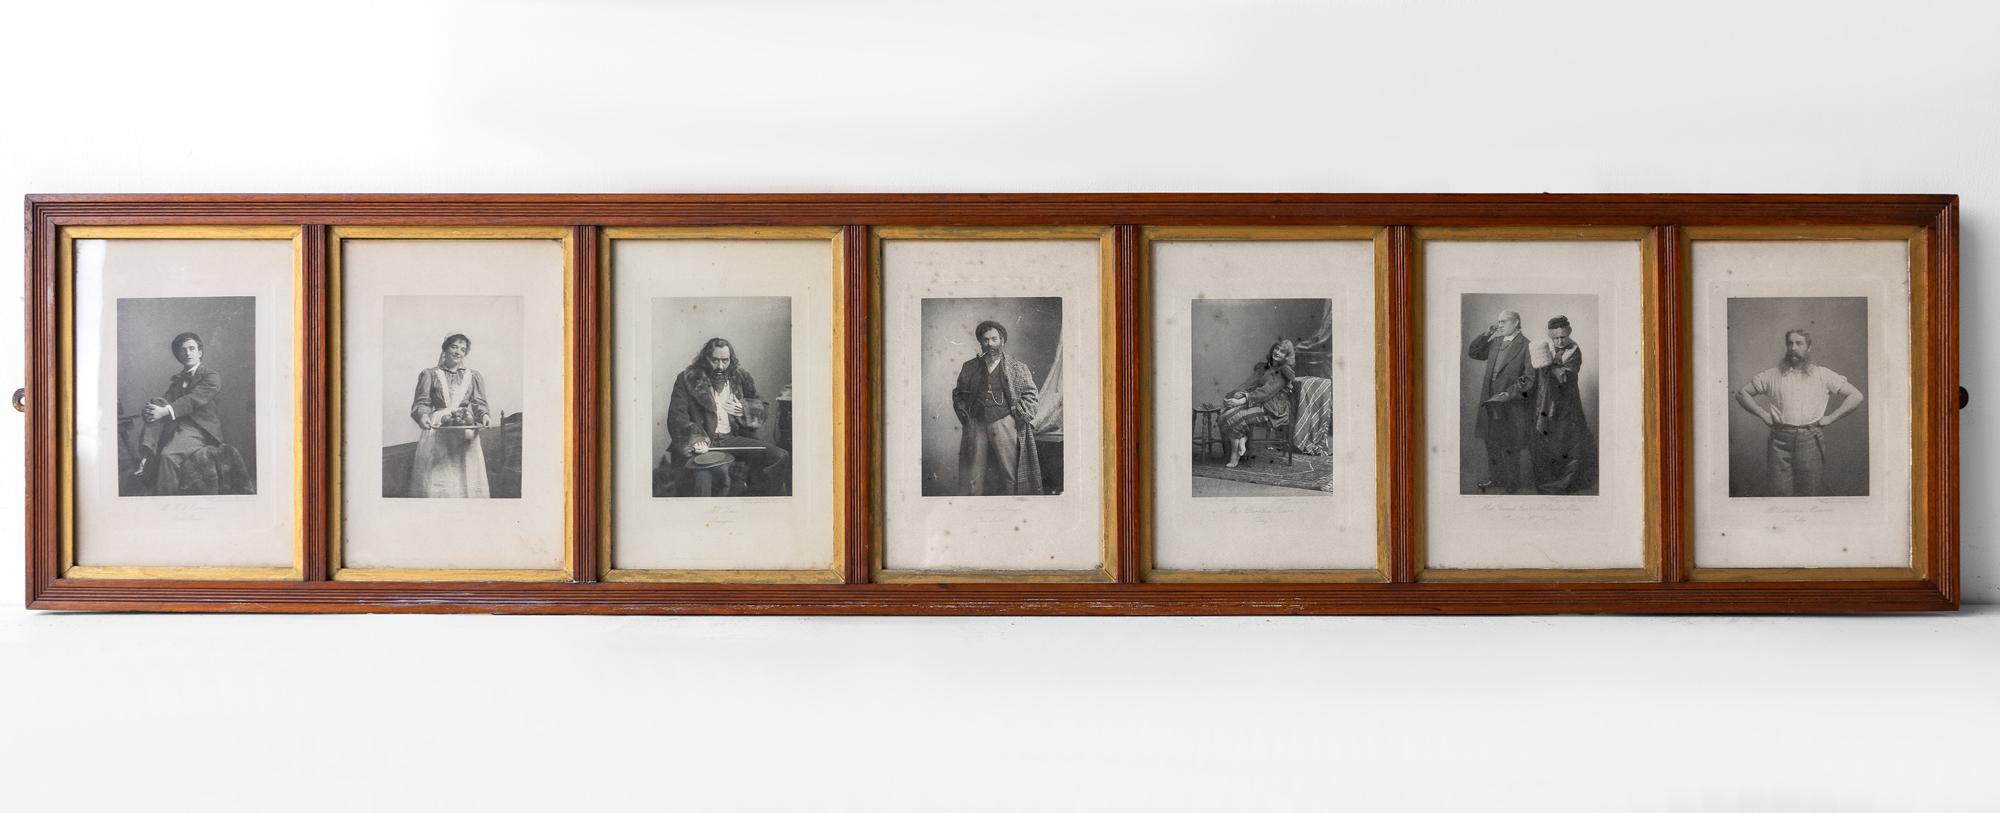 Glass Set Of Antique Photographs Of Actors In Costume From 'Trilby' Theatre Production For Sale